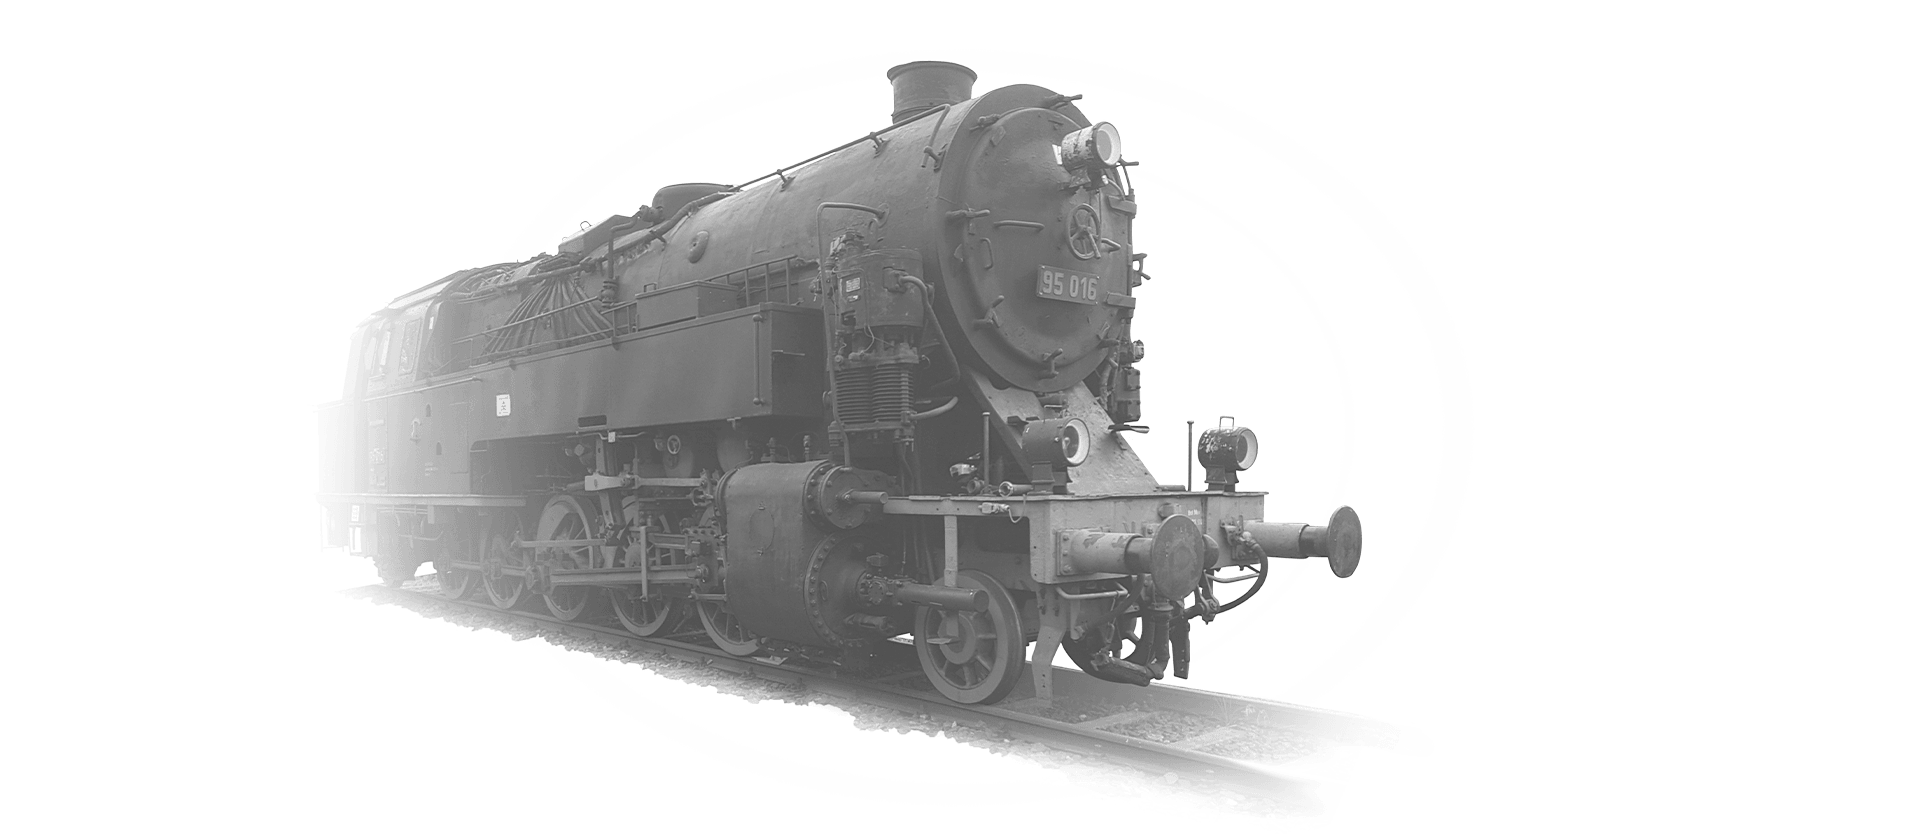 The locomotive 95-016 is coming towards the camera in black and white